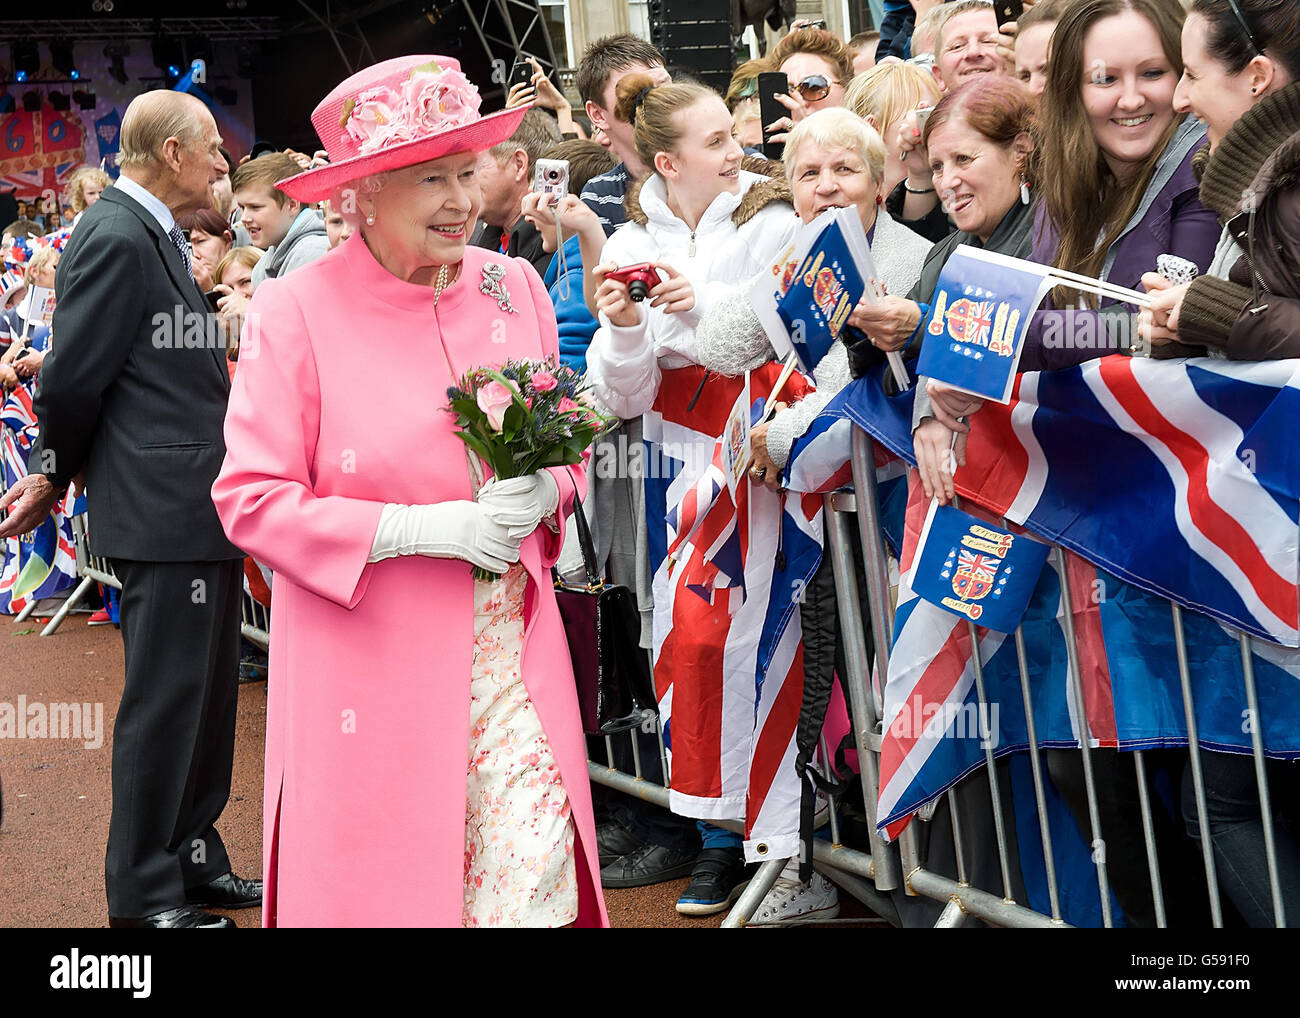 Queen Elizabeth II meets well wishers in George Square, Glasgow during a visit to Scotland as part of her Diamond Jubilee Tour. Stock Photo